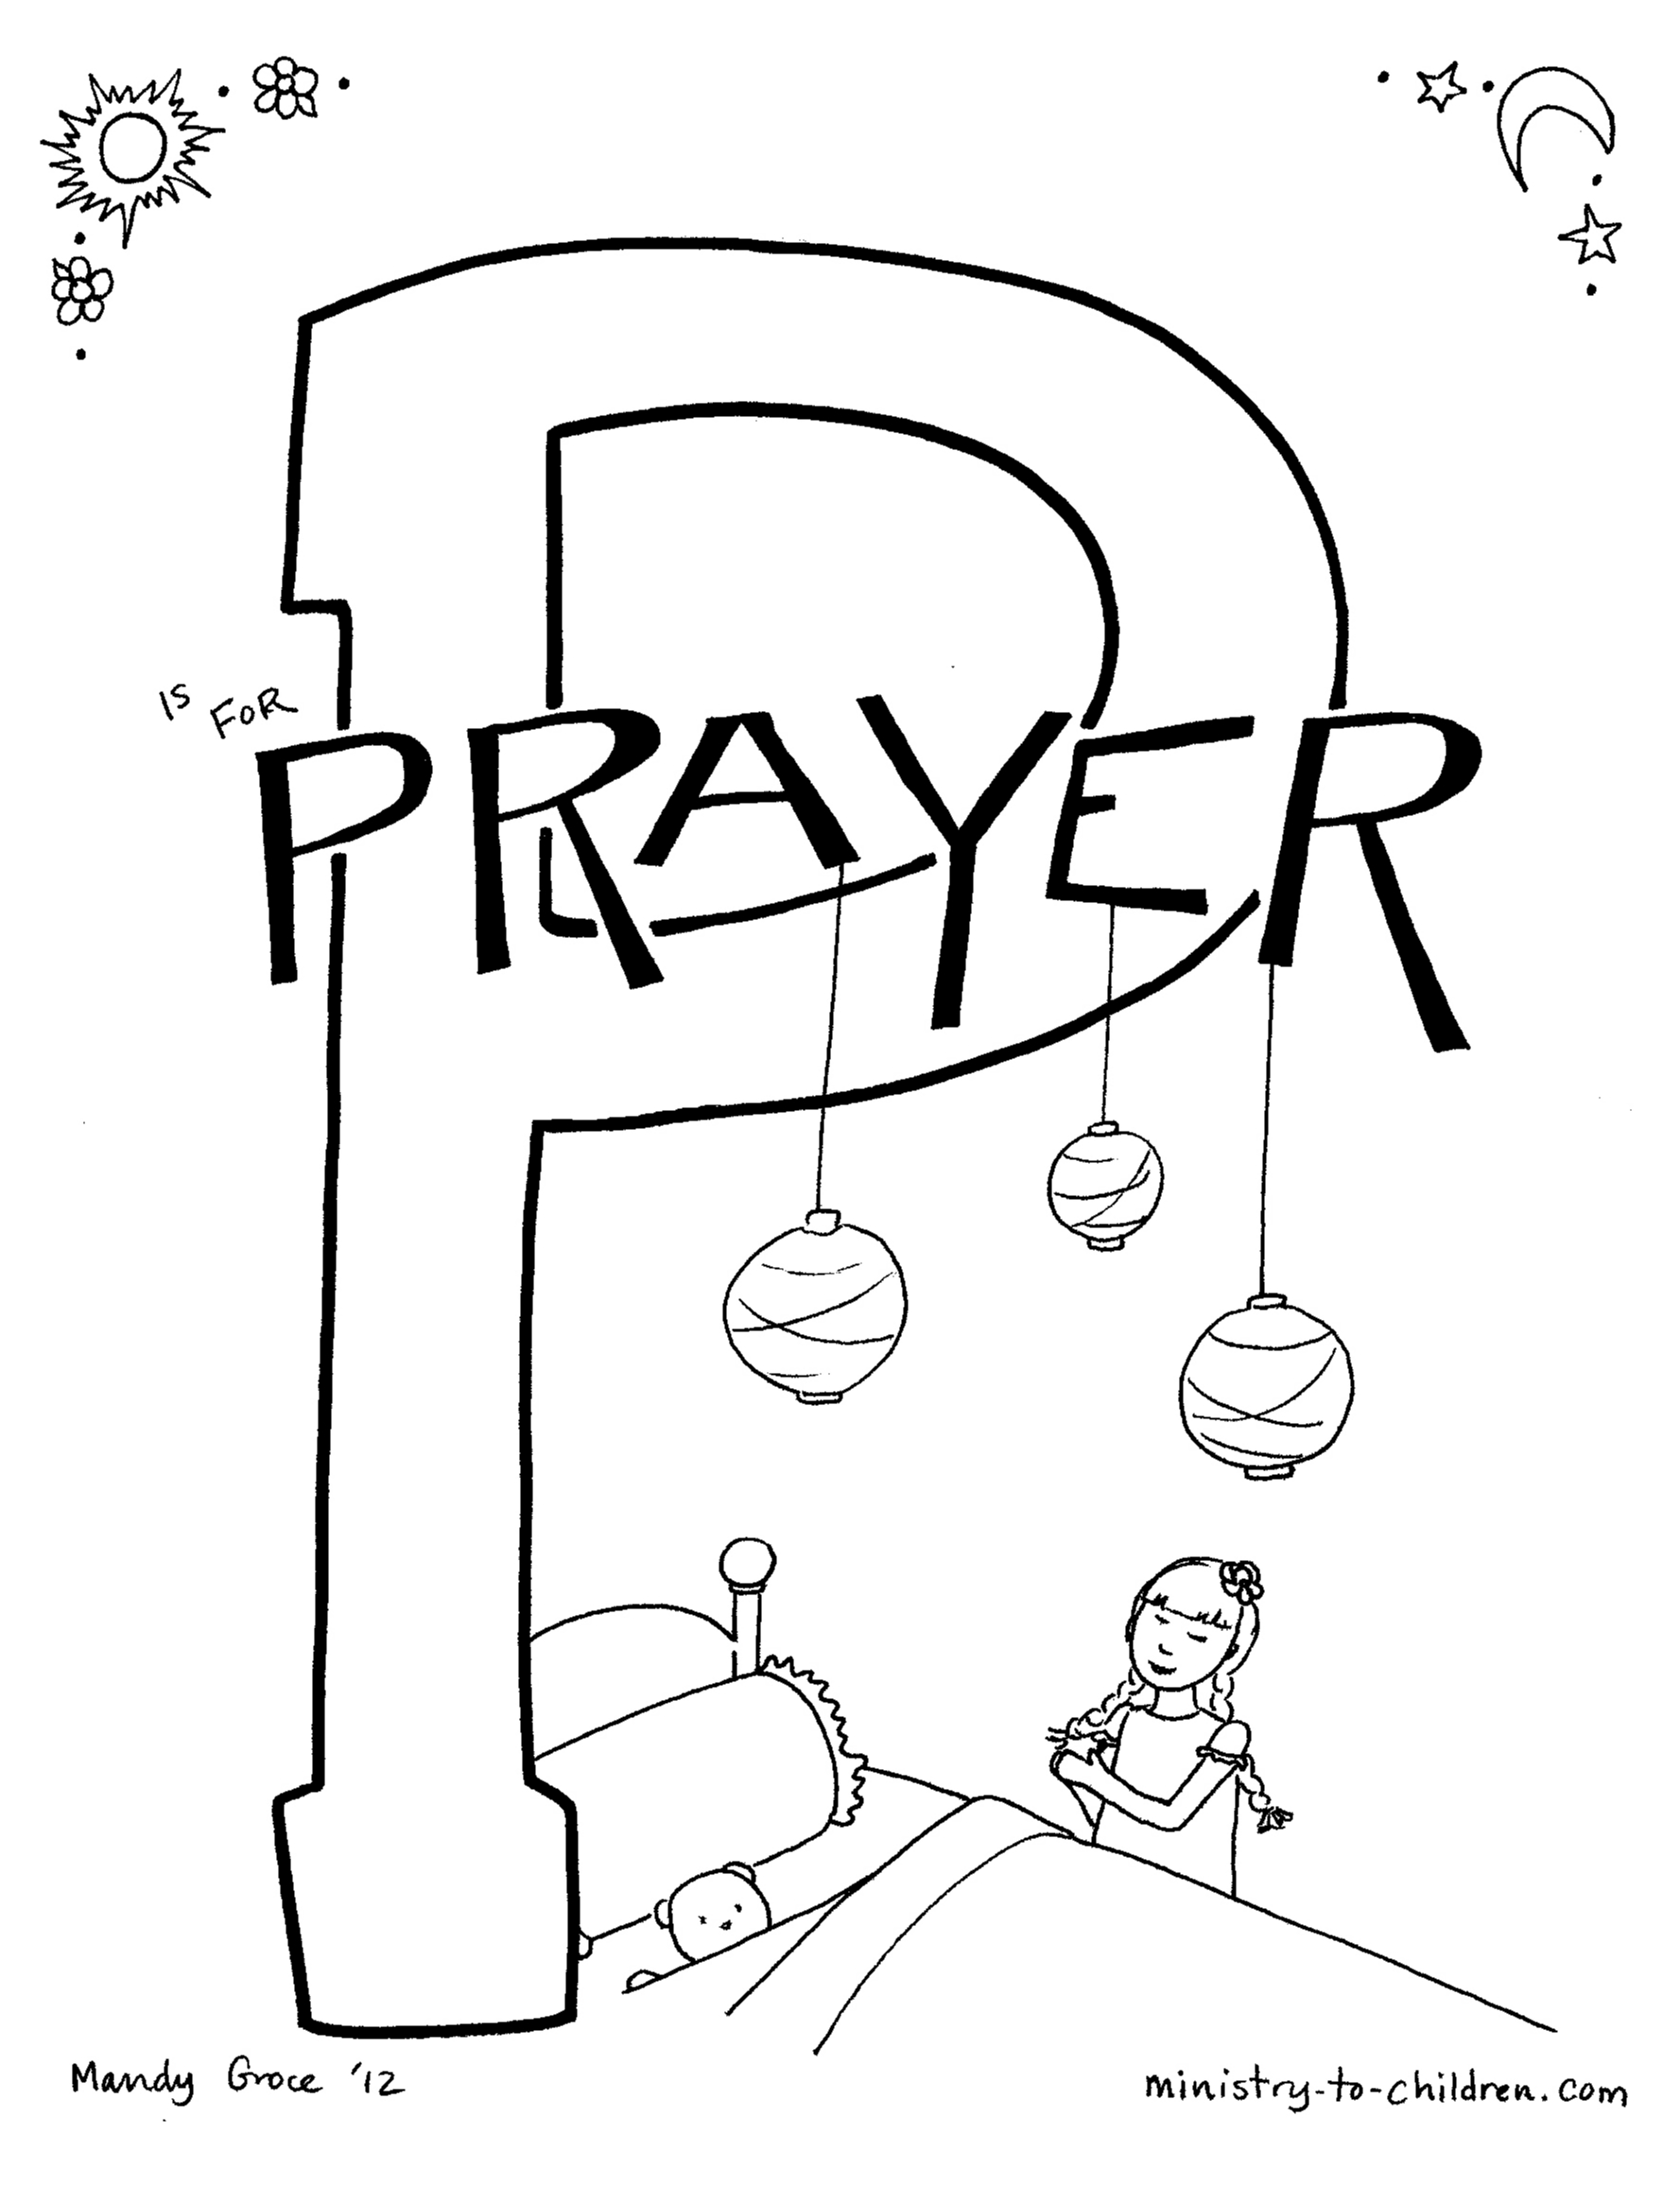 Christian Coloring Pages For Toddlers Coloring Pages Free Printable Coloring Pages For Kindergarten